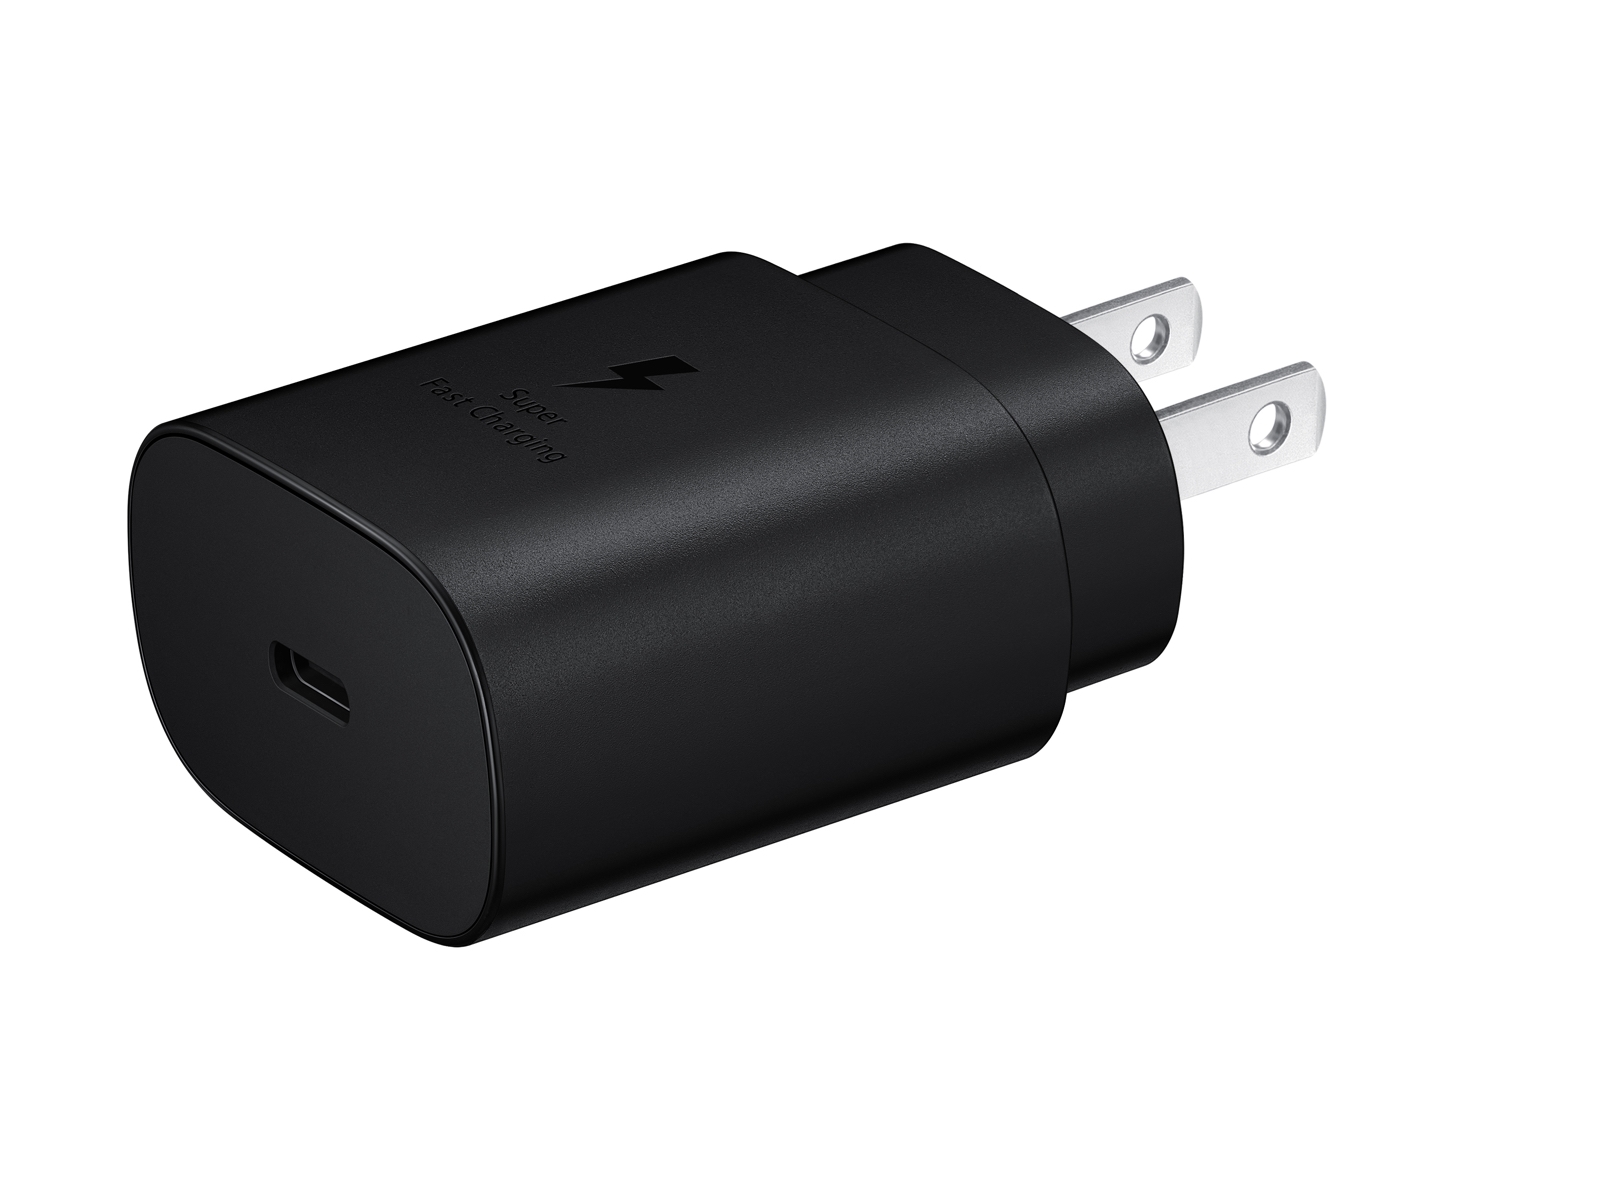 25W USB-C Fast Charging Charger, Black Mobile Accessories - EP-TA800XBEGUS | Samsung US